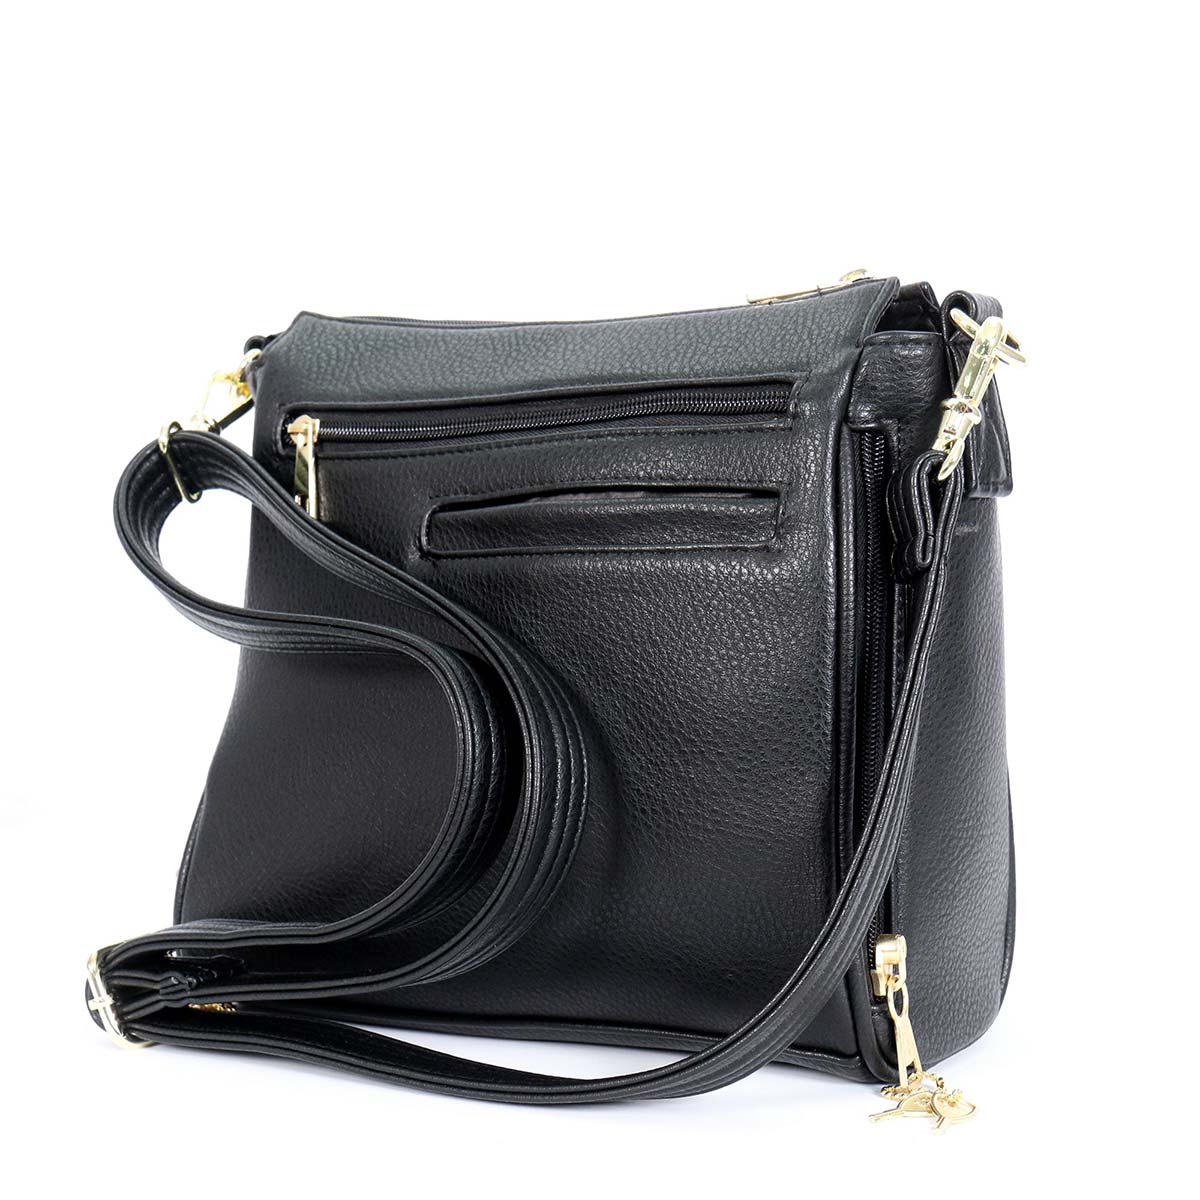 Hot Leathers PUA1176 Black Vegan Leather Concealed Carry Purse with Ambidextrous Design